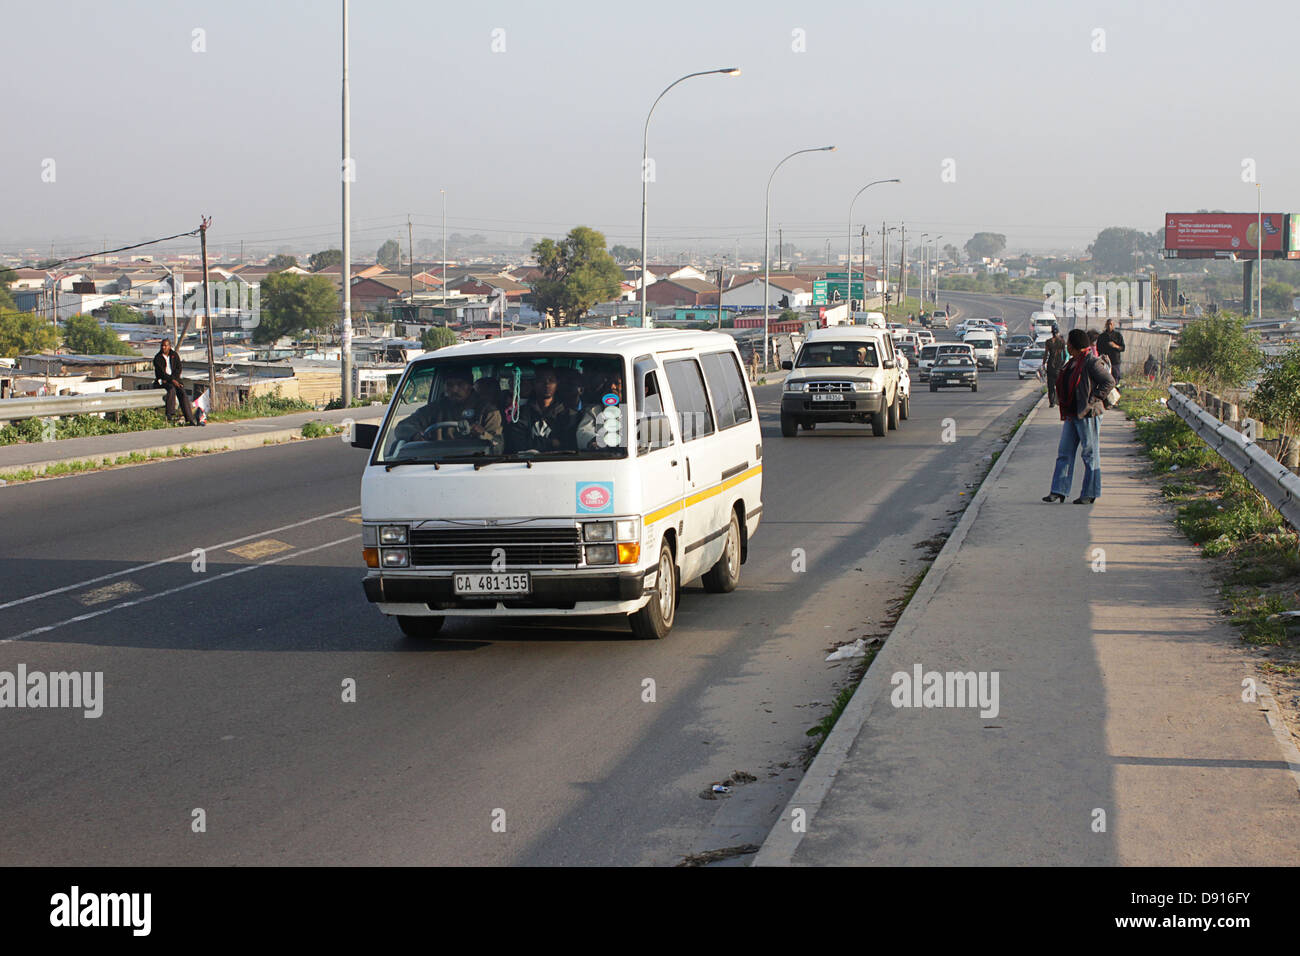 Photos of traffic and daily life in the township of Delft, South Africa Stock Photo